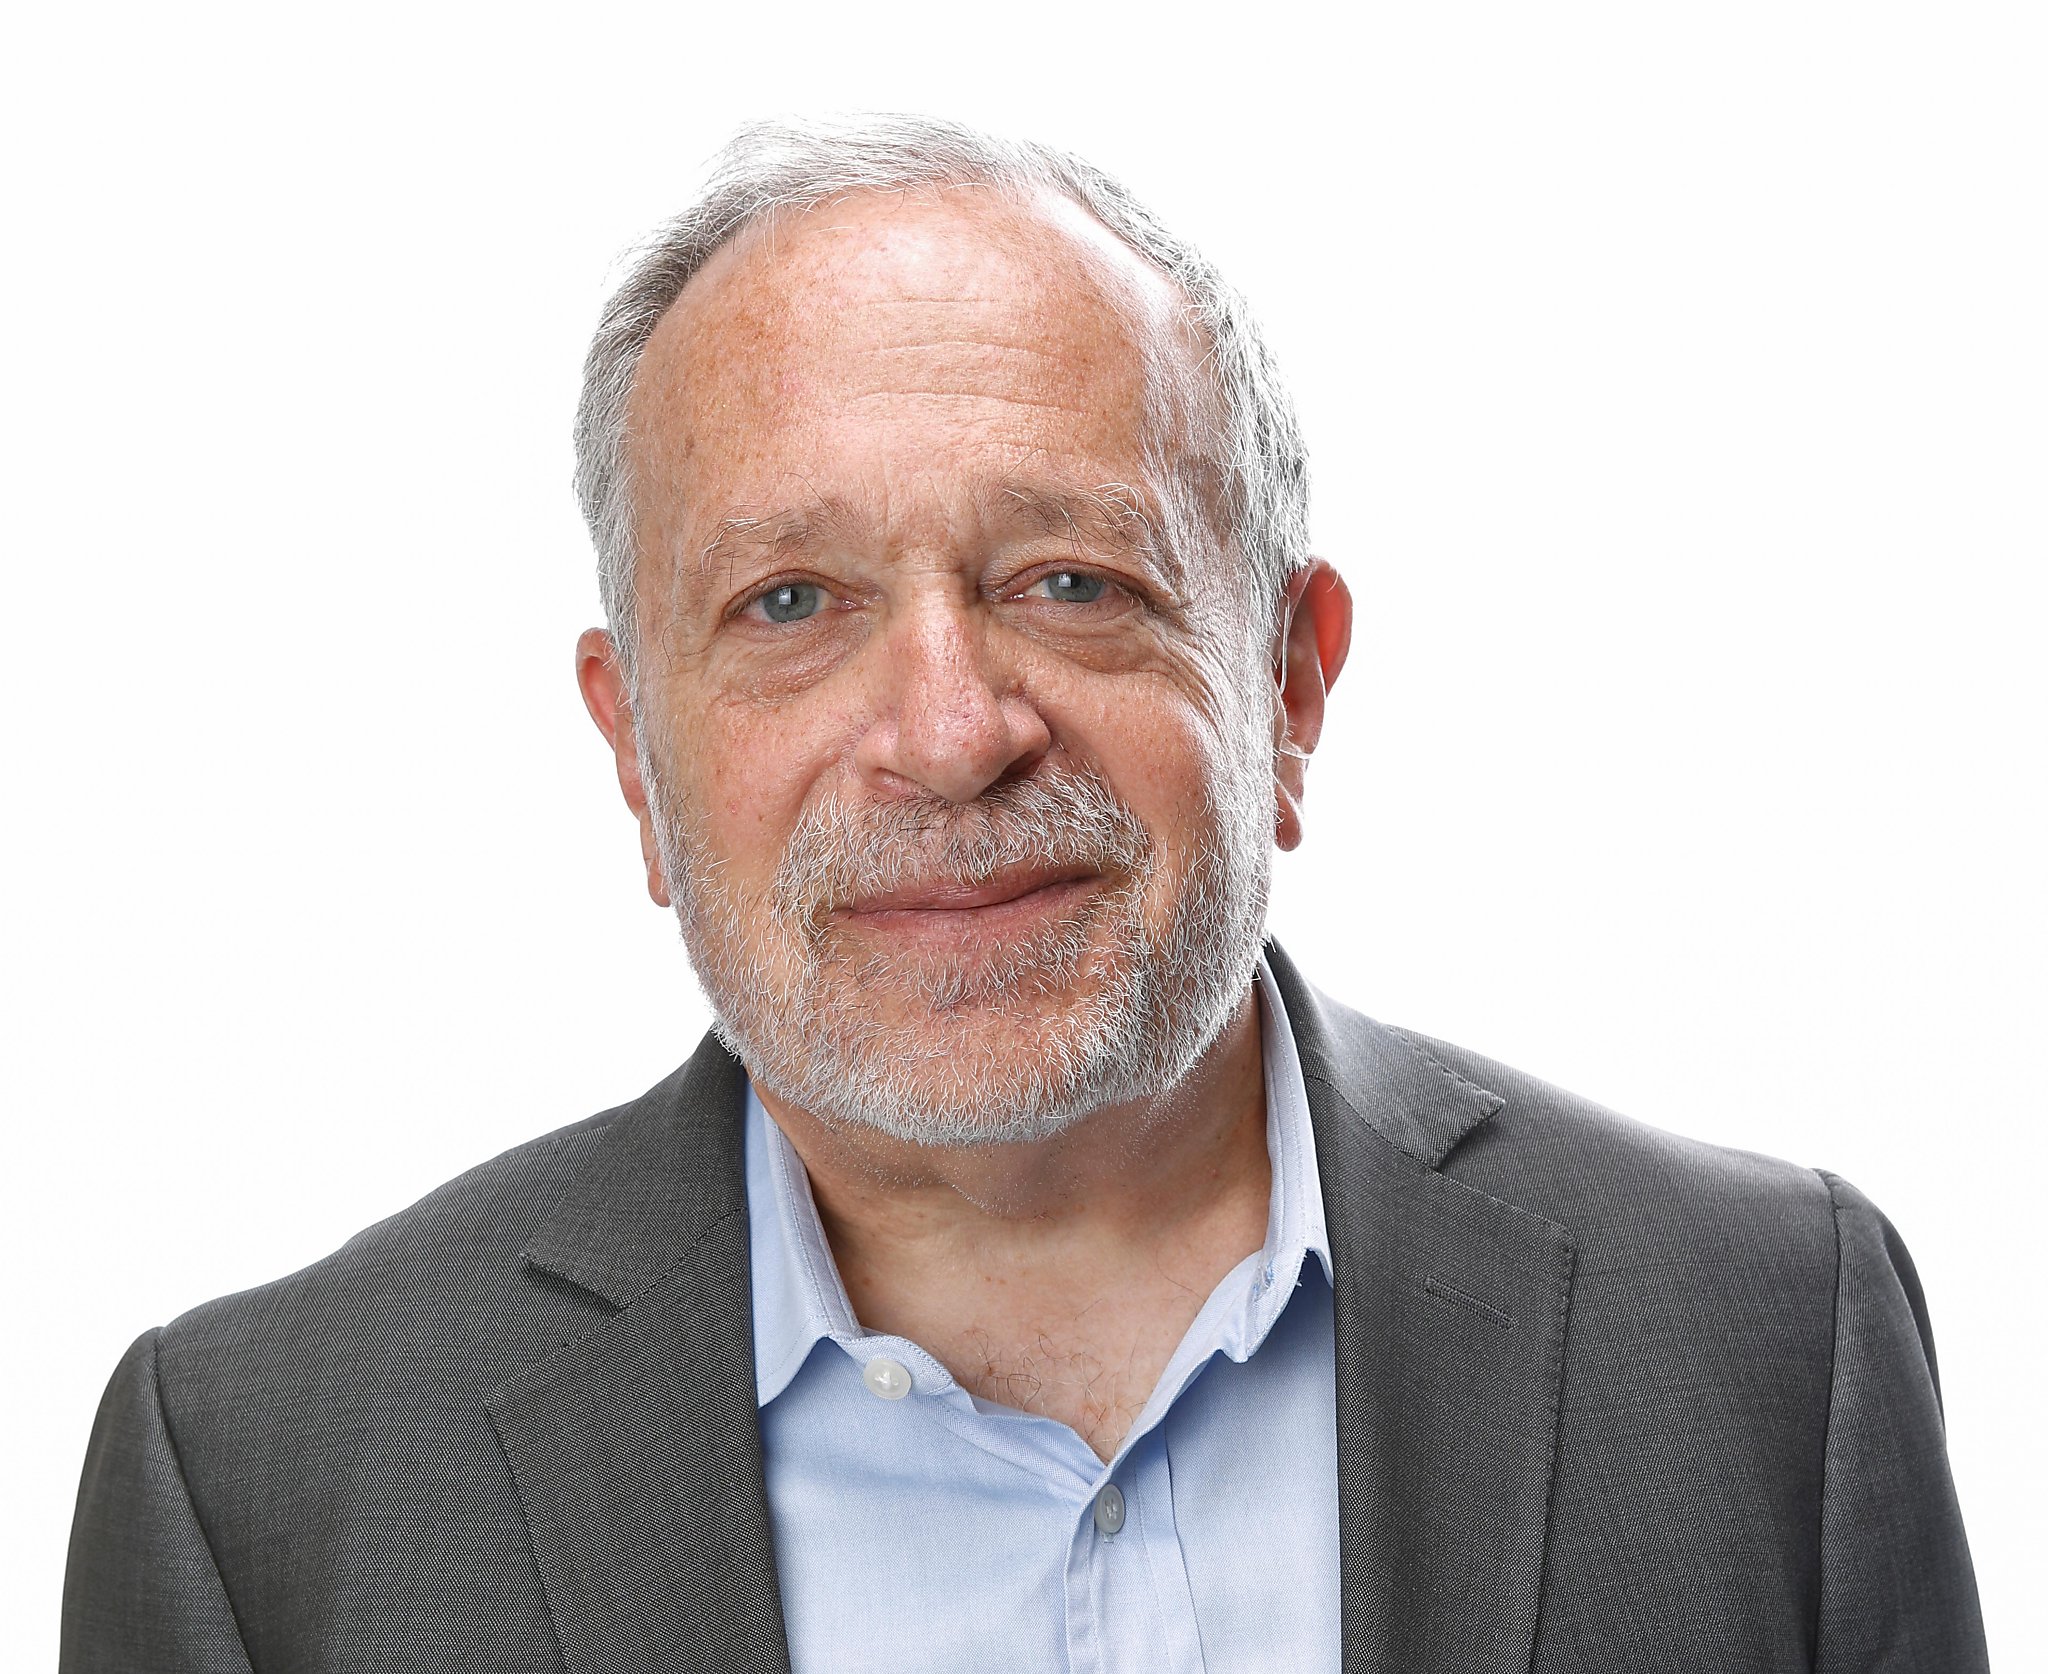 Robert Reich urged by faculty group as new UC Berkeley chancellor